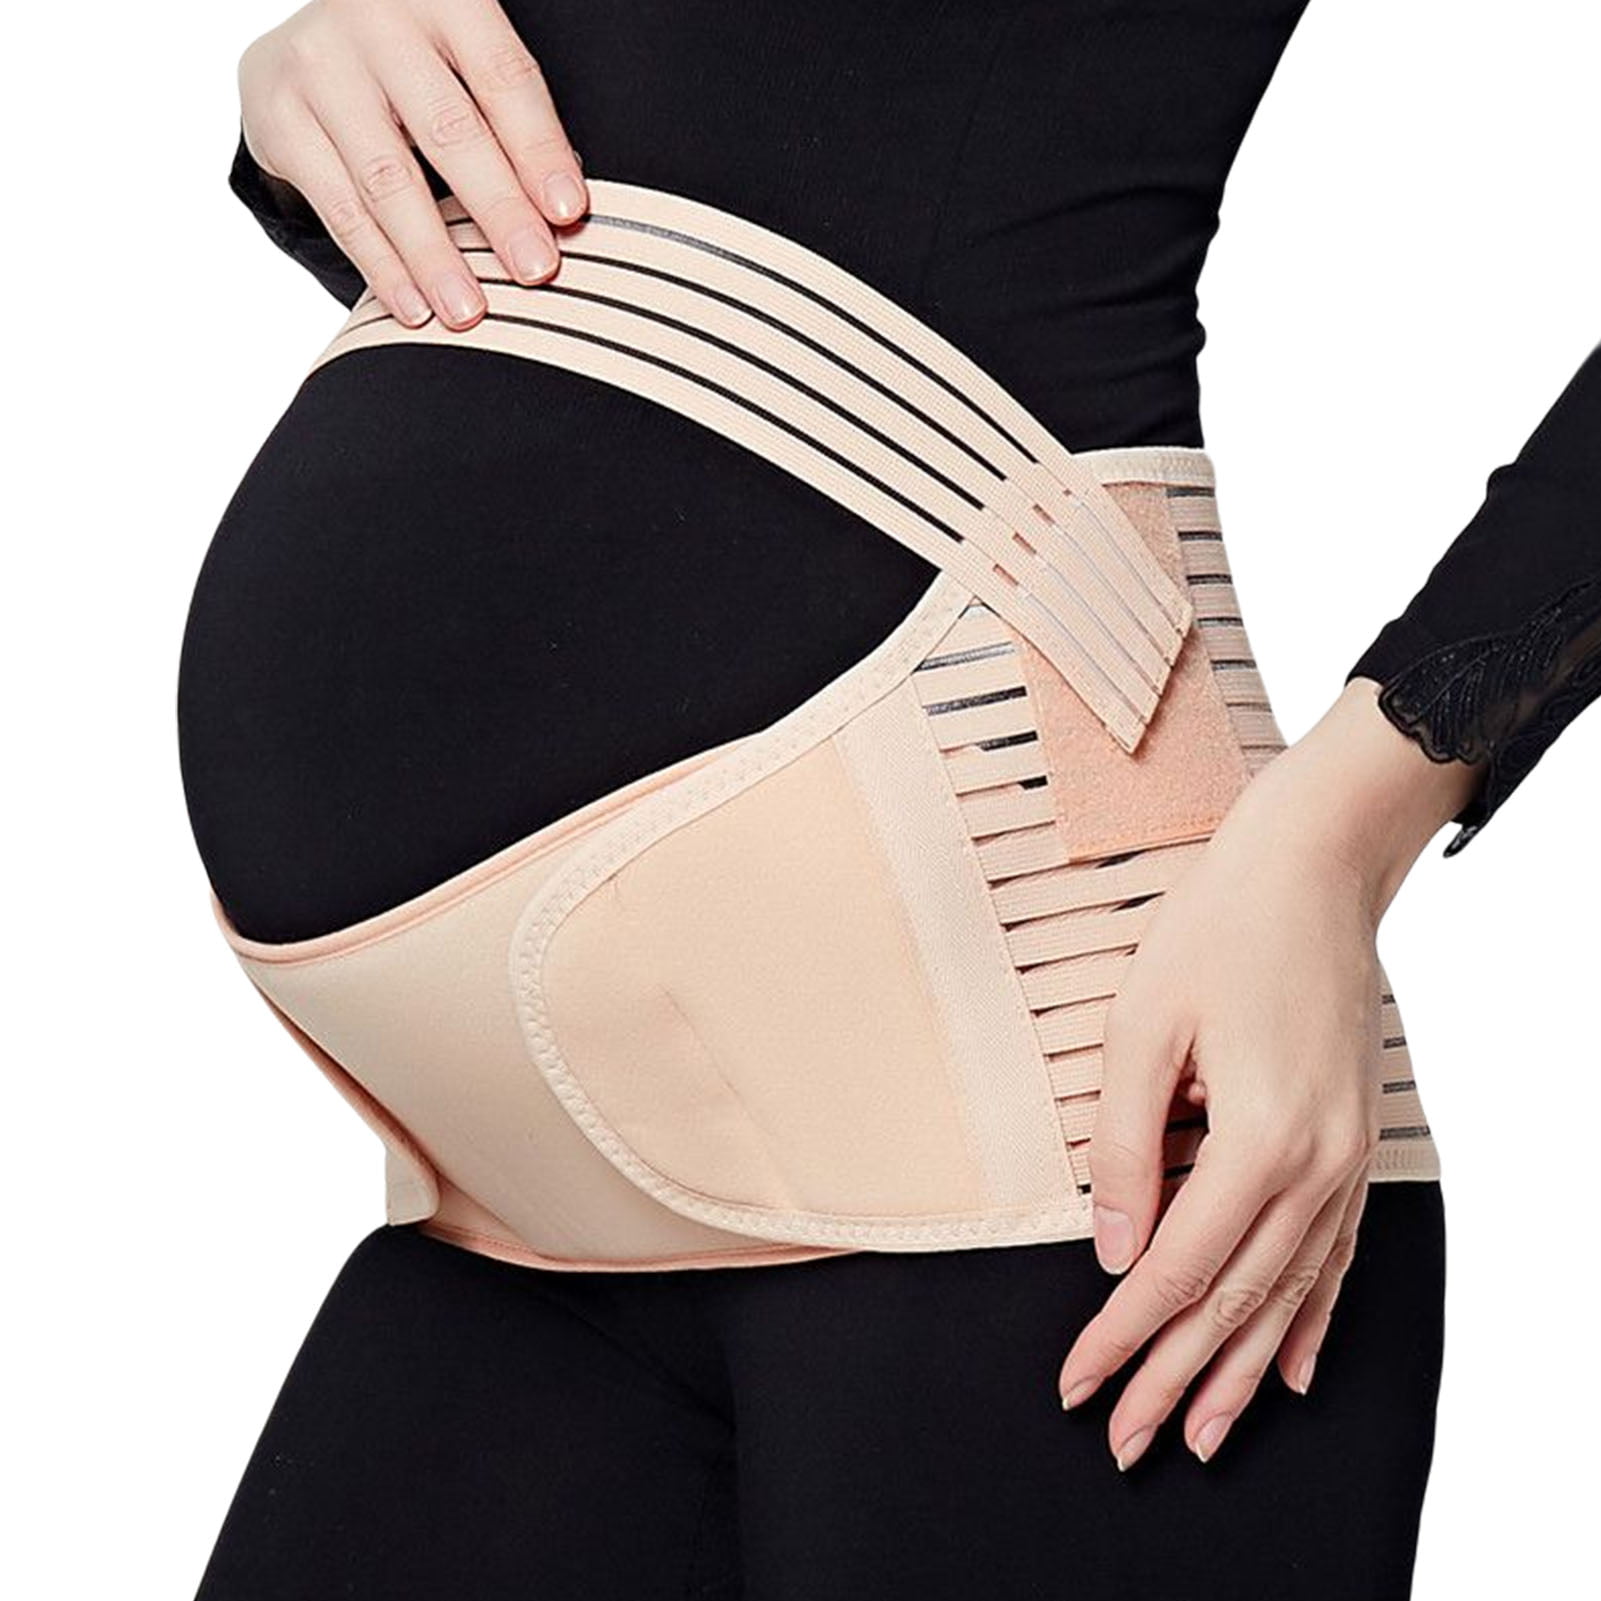 Maternity Belly Band Belt Super Light Stretchable Supportive Washable 2 Colors